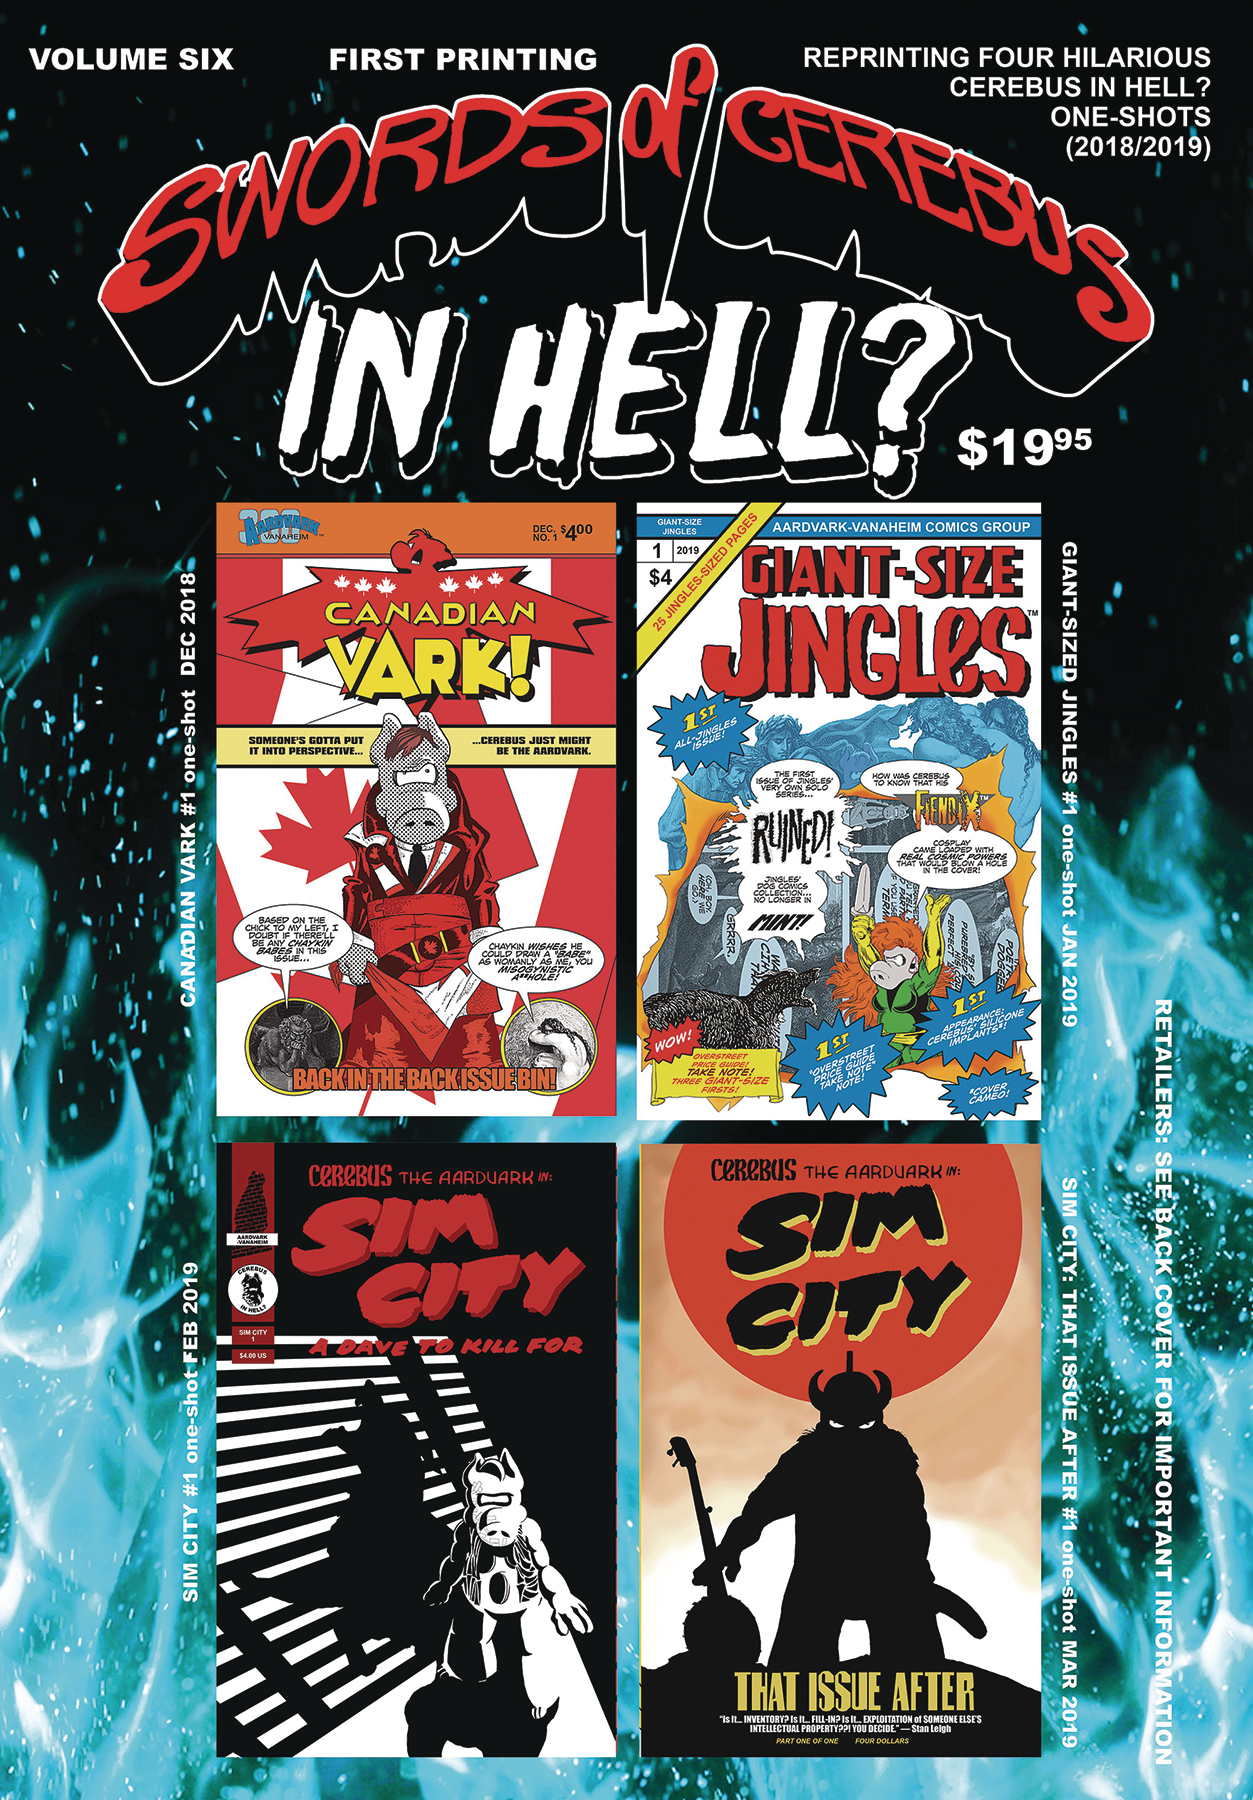 Swords of Cerebus In Hell Graphic Novel Volume 6